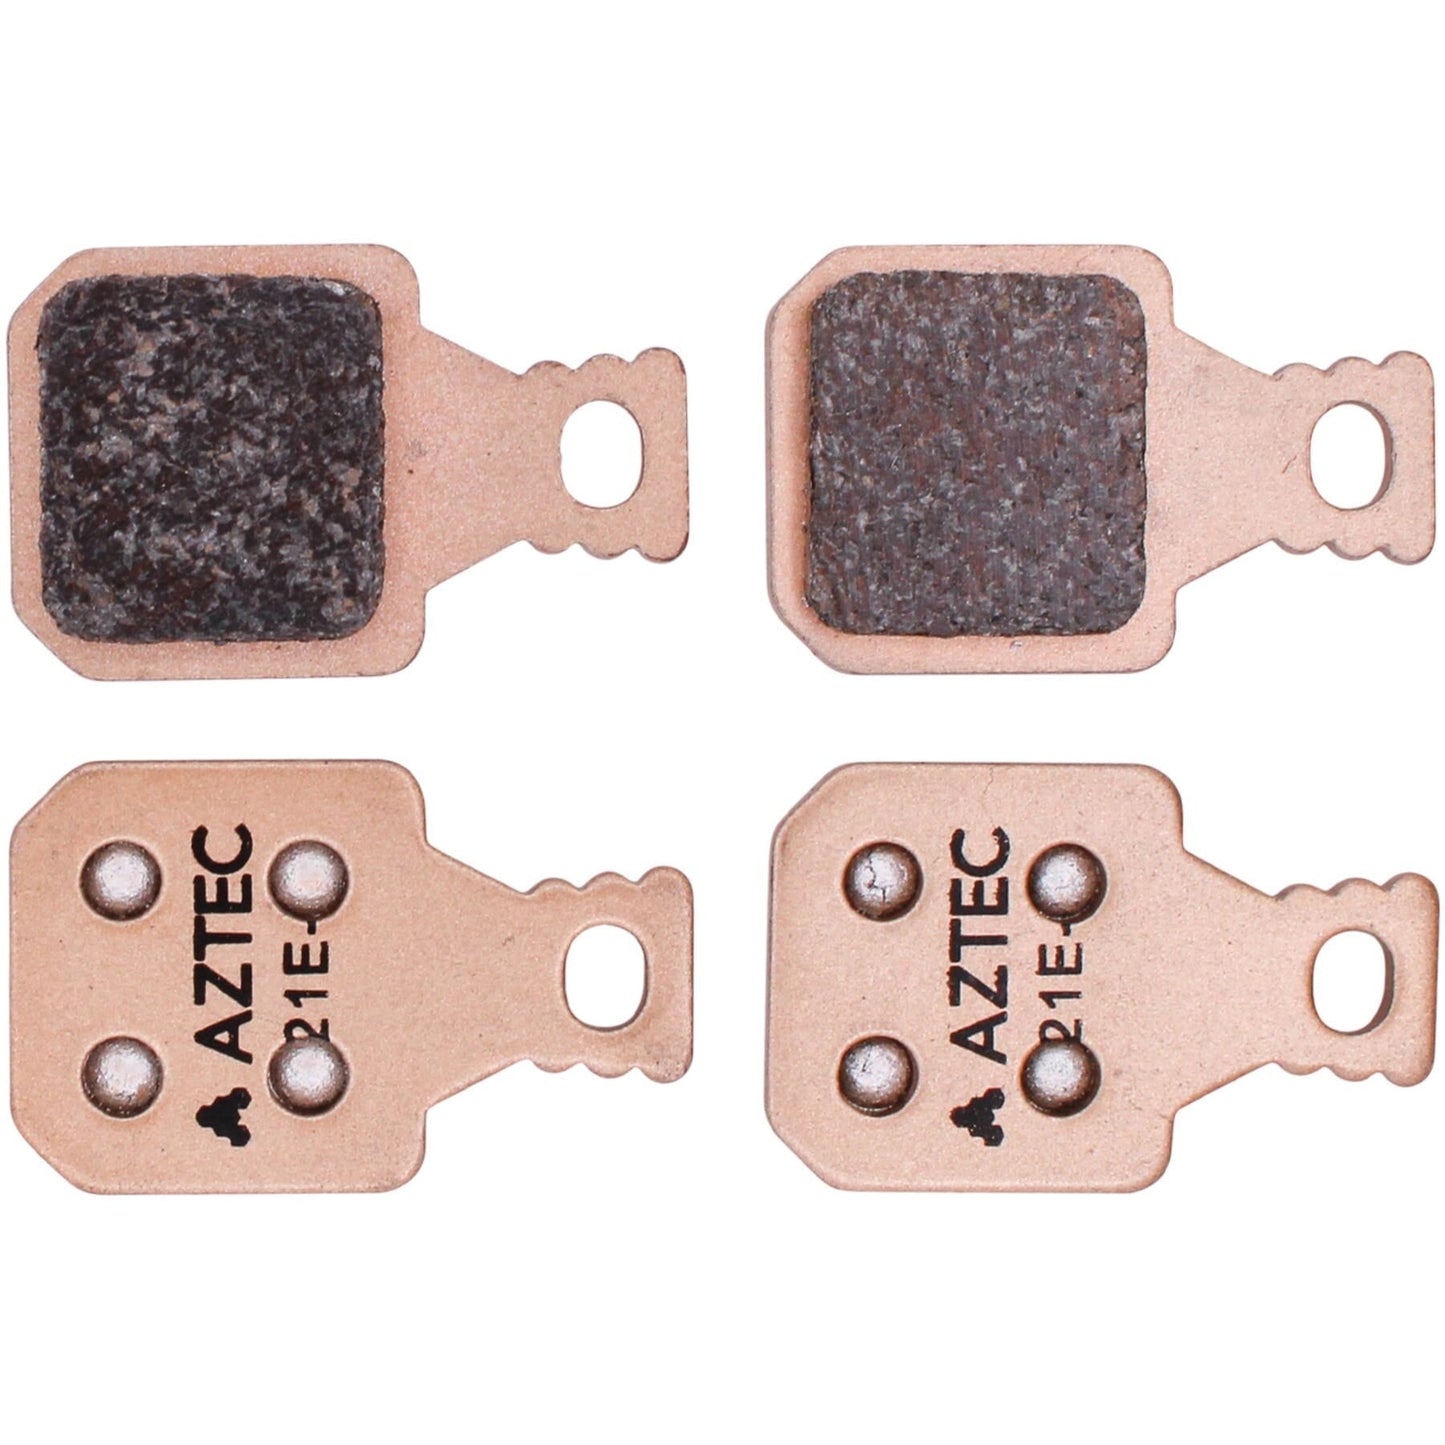 Sintered Disc Brake Pads For Magura MT5 And MT7 Callipers (2 Pairs)